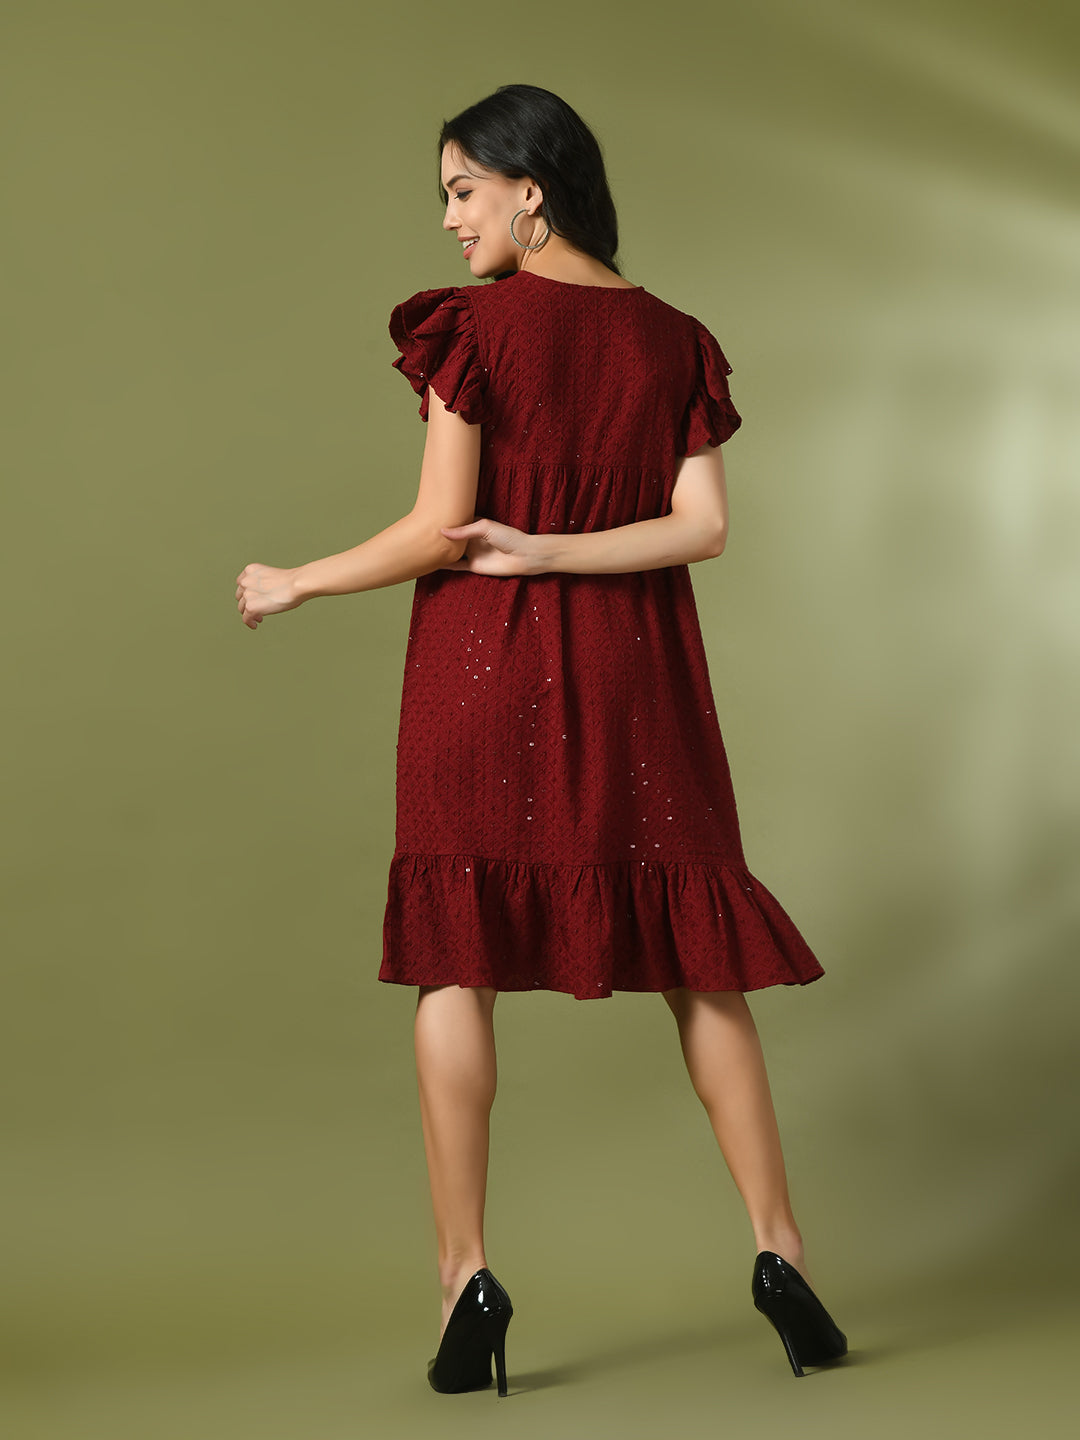 Women's  Maroon Embroidered Cotton Round Neck A-Line Party Dress  - Myshka